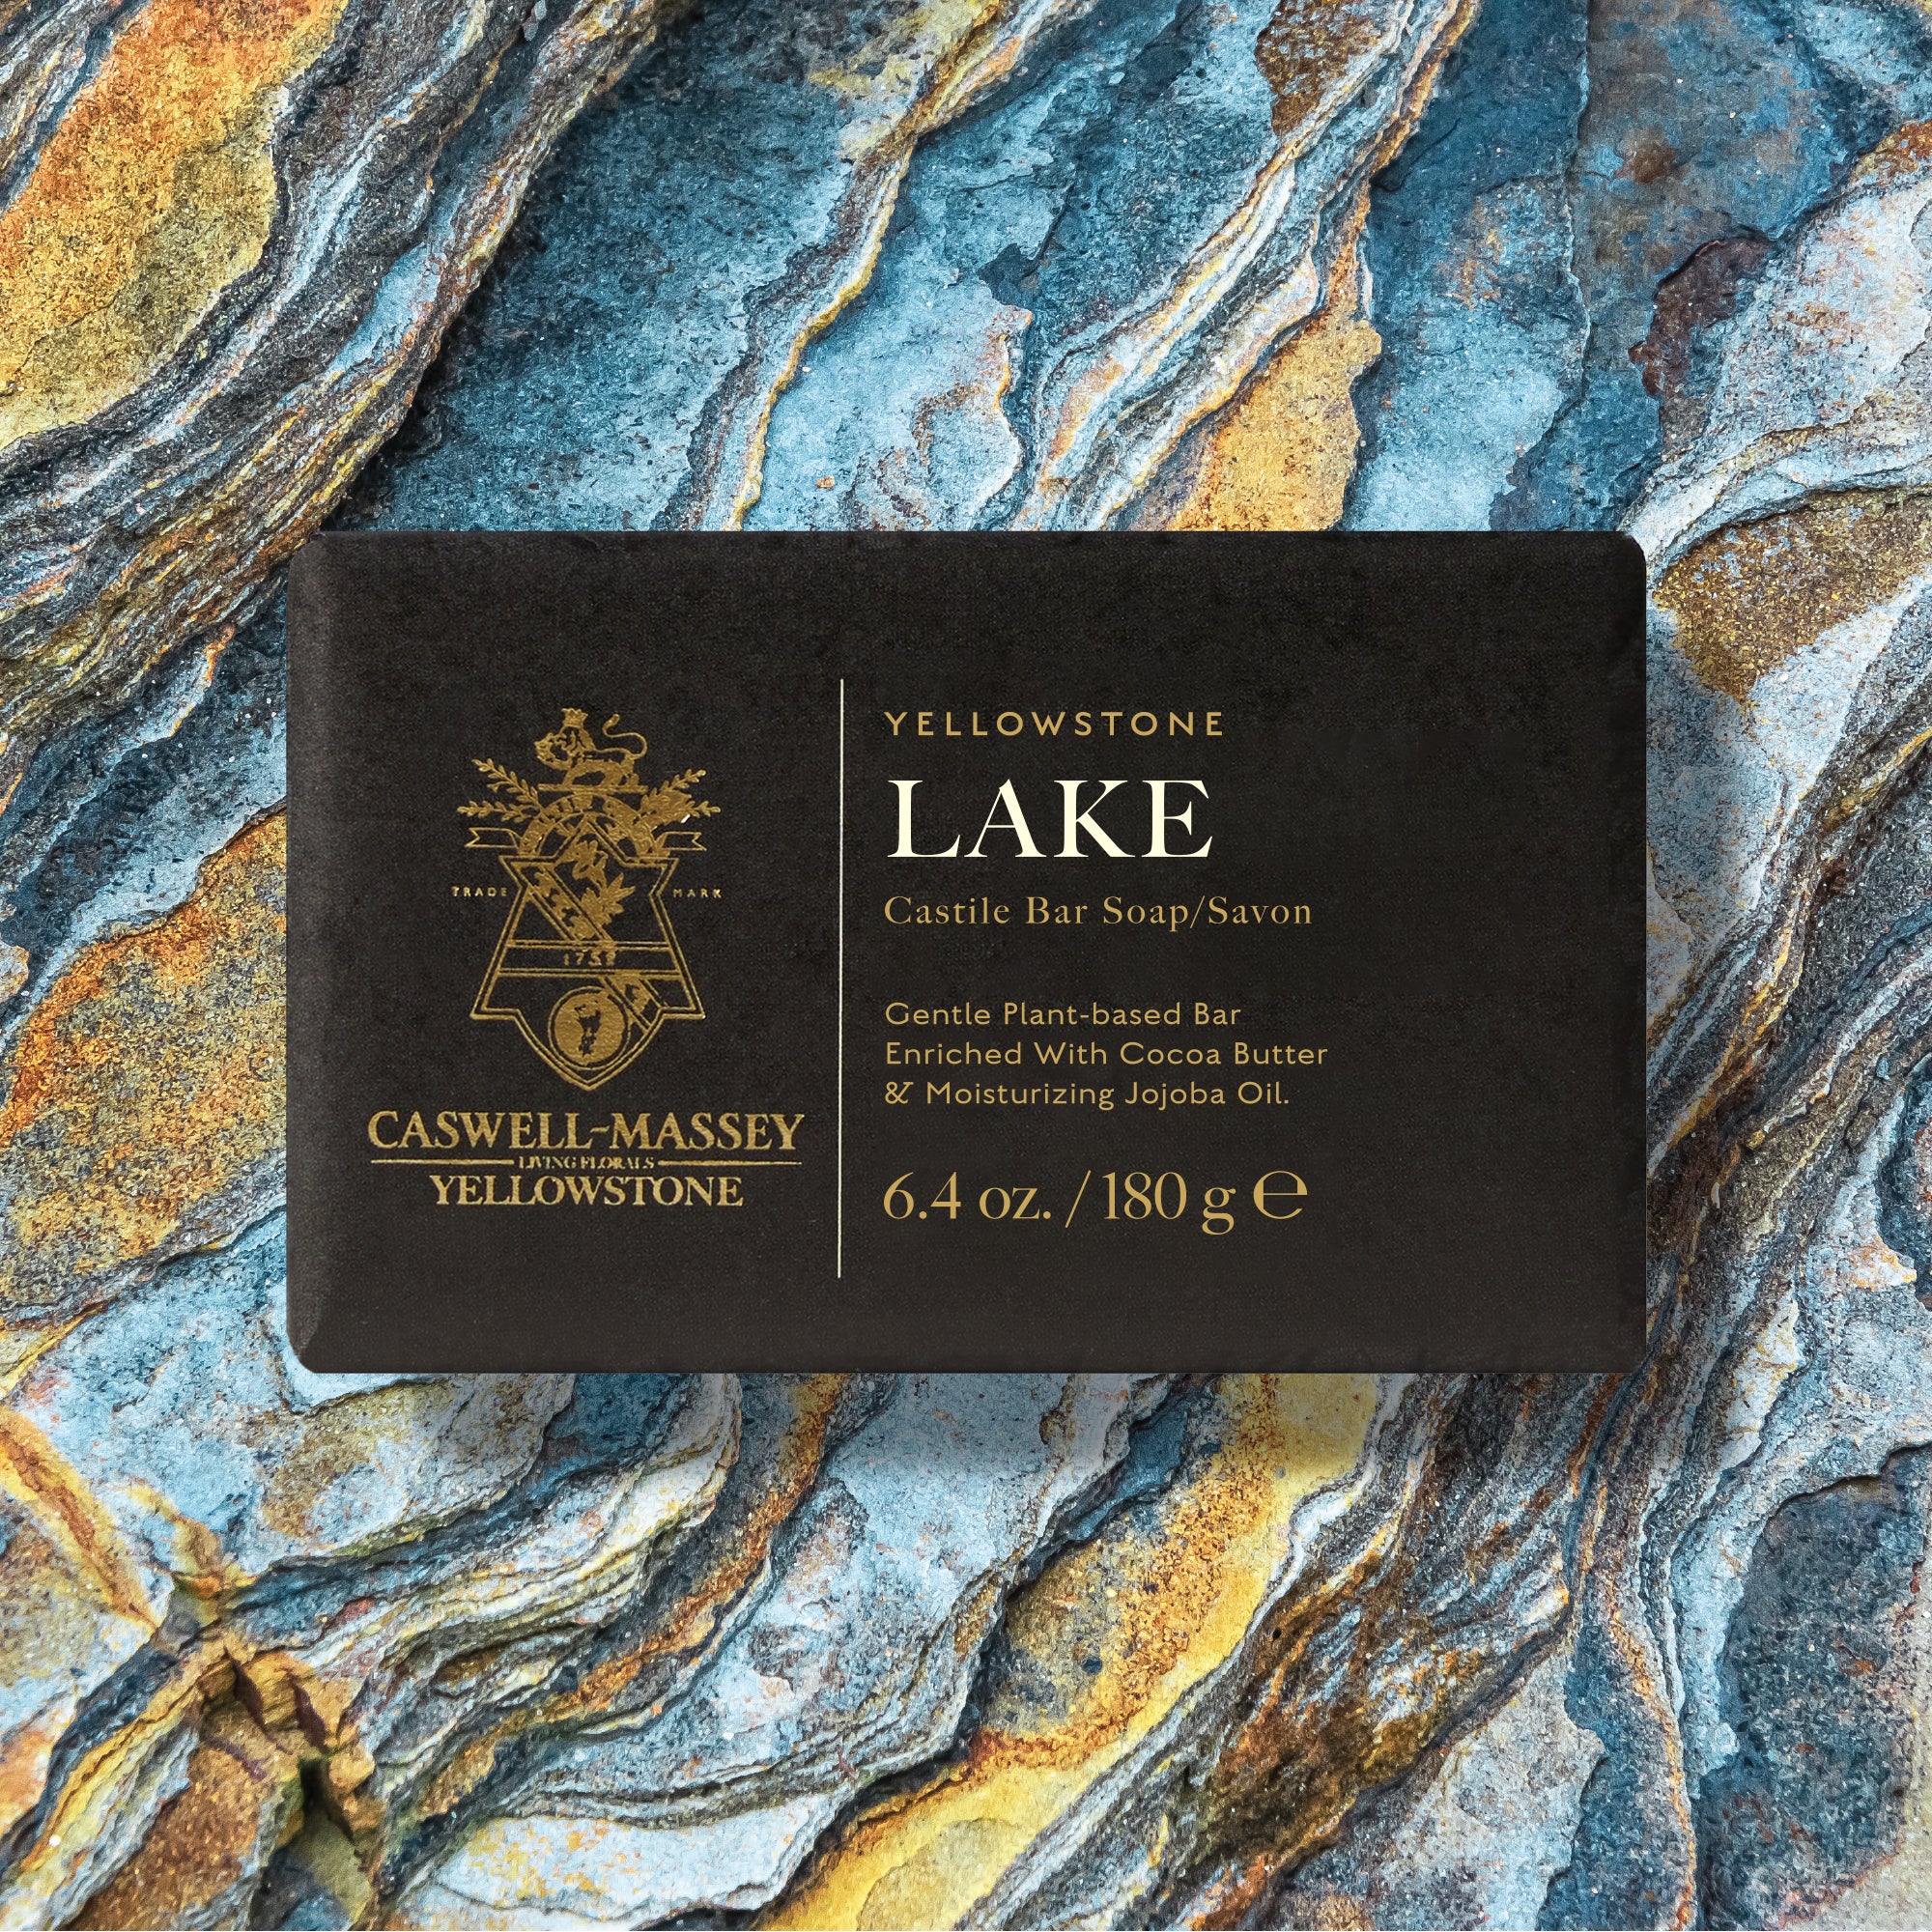 Caswell-Massey Yellowstone Lake Bar Soap shown with paper packaging